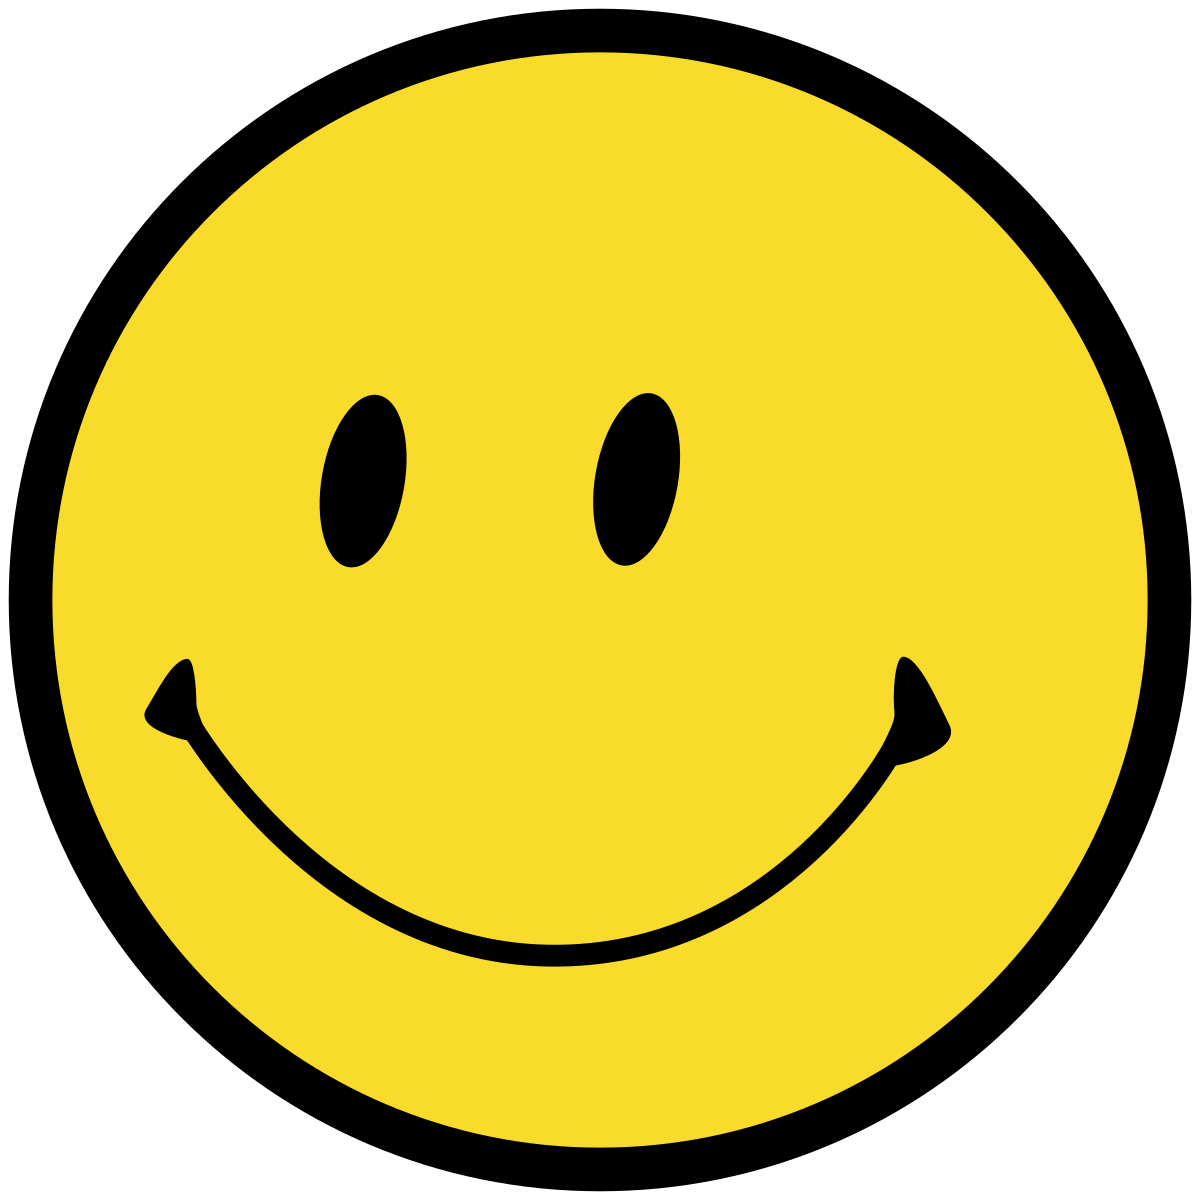 Smiley Face PNG Image HD